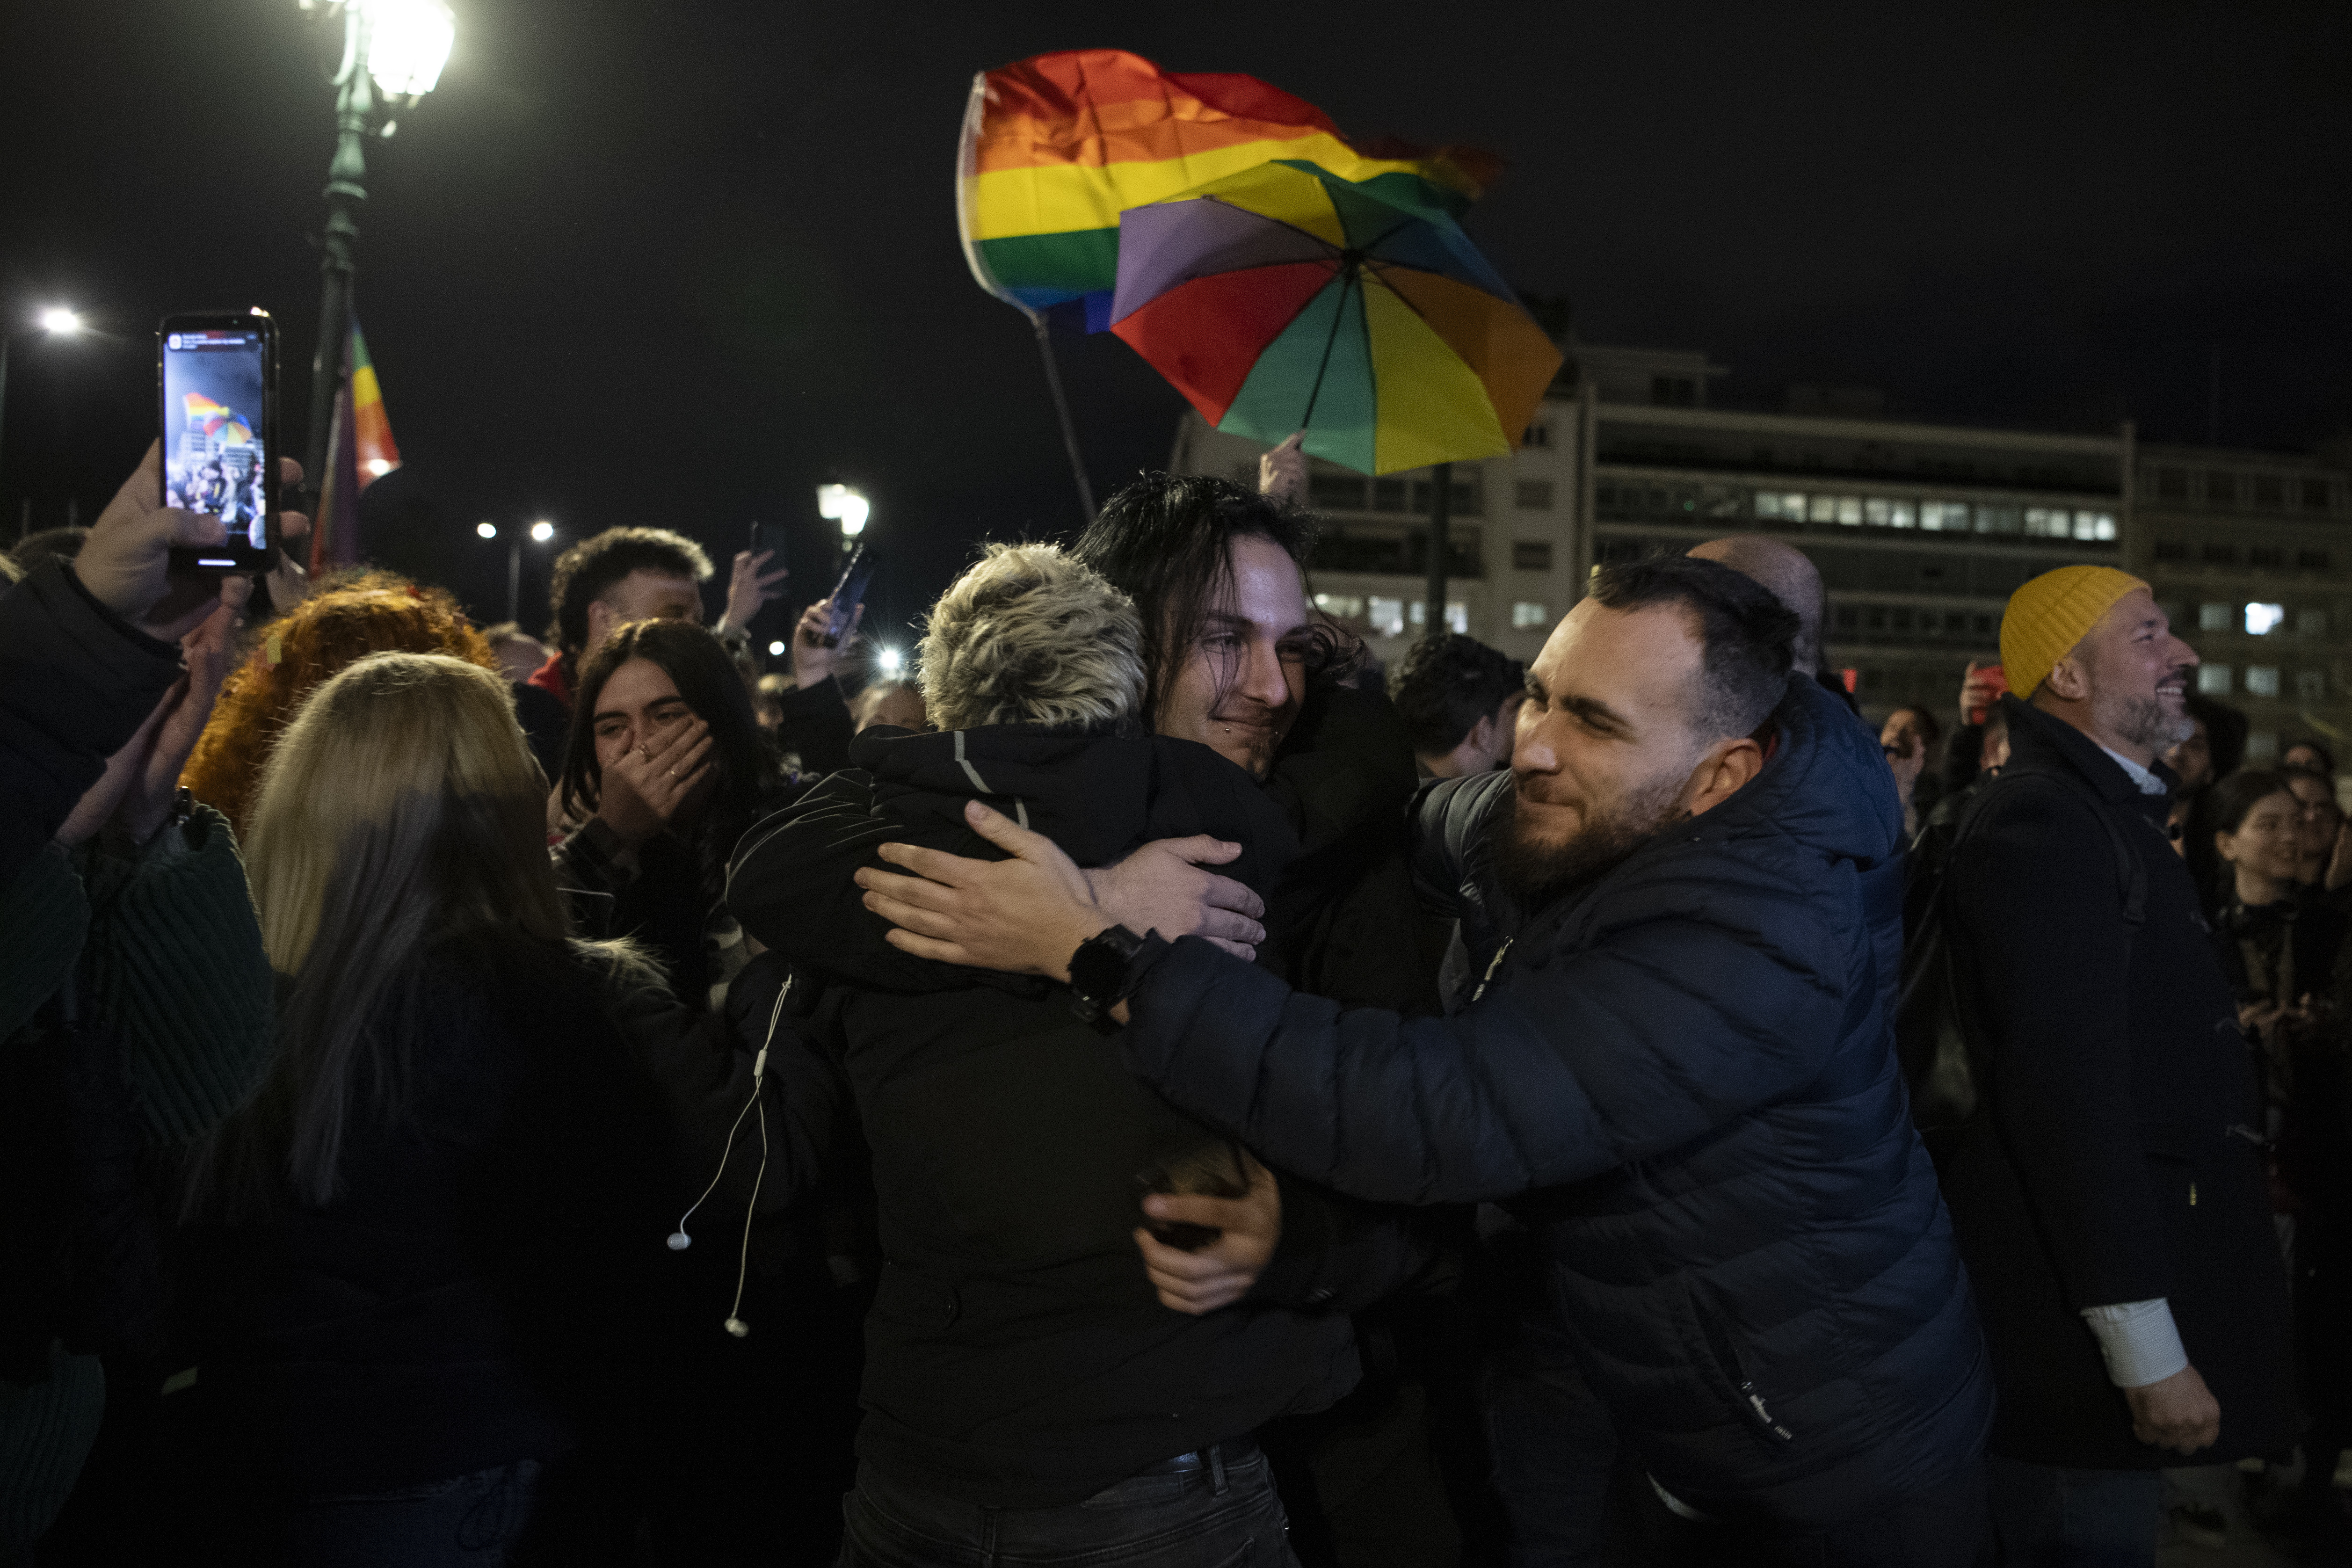 Supporters of the same-sex marriage bill, react during a rally at central Syntagma Square, in Athens, Greece